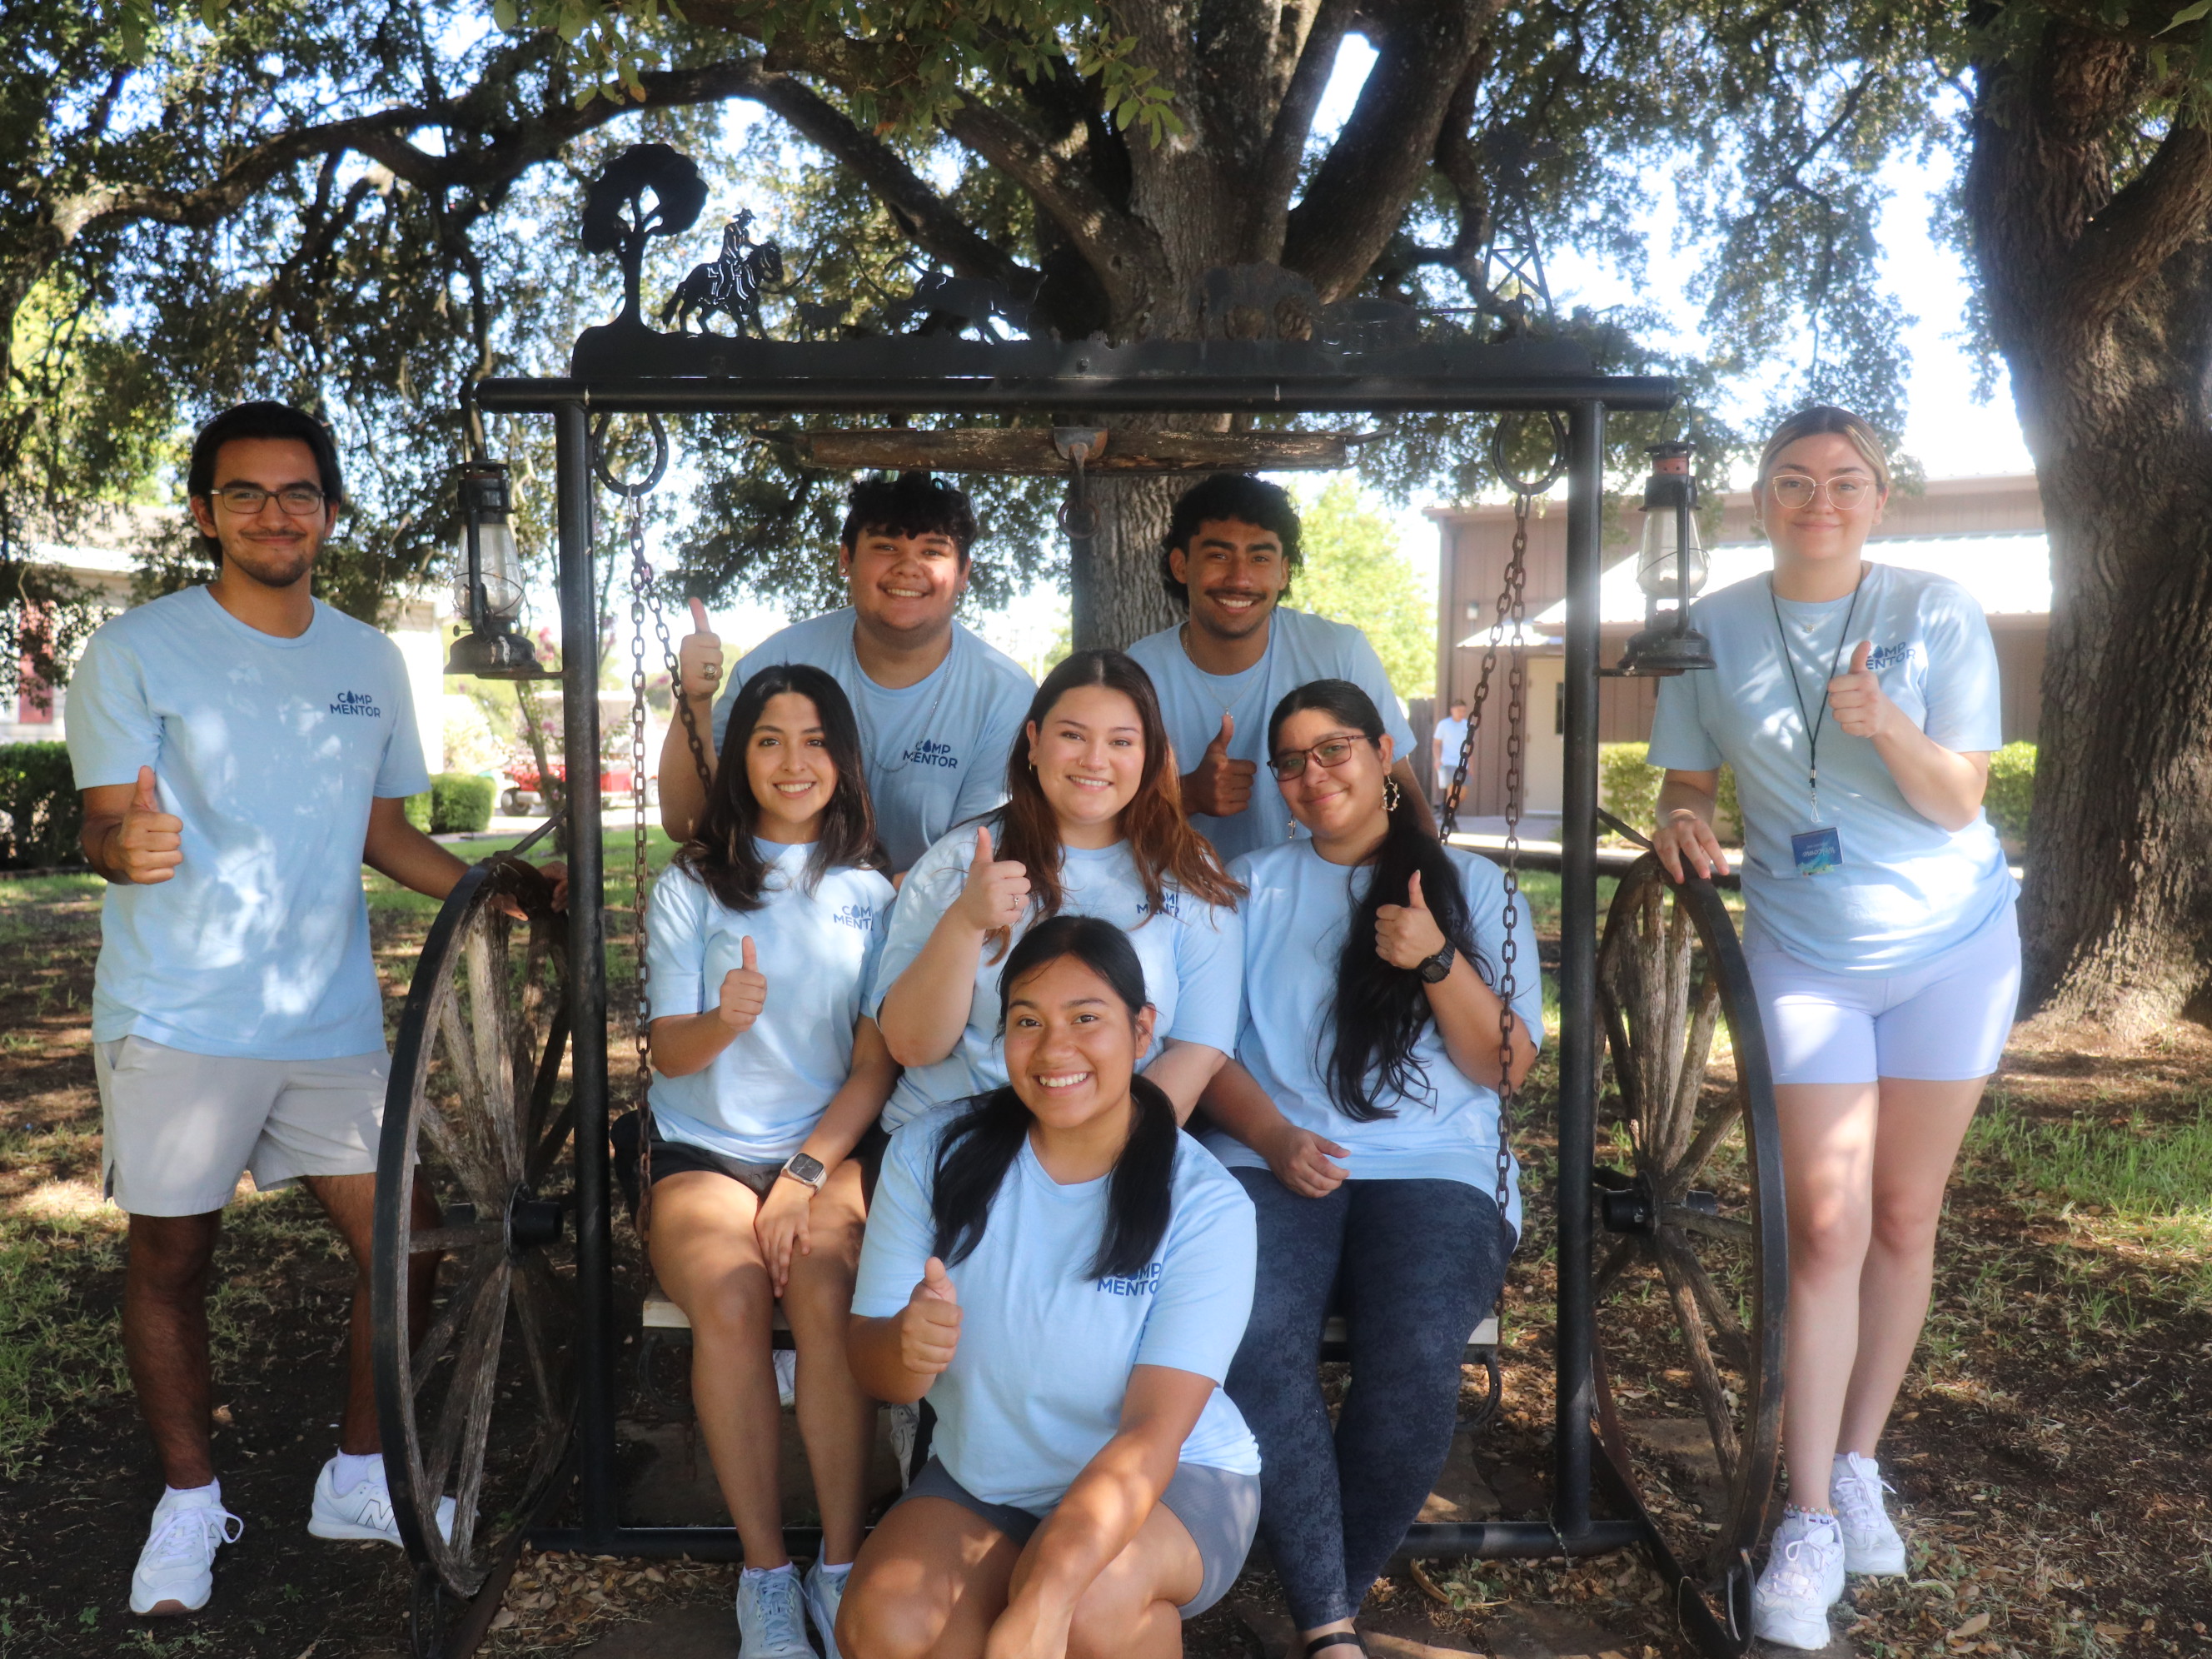 Eight GTF Mentors posing together on a swing while at CAMP Mentor 2023. They are wearing matching blue "Camp Mentor" shirts.